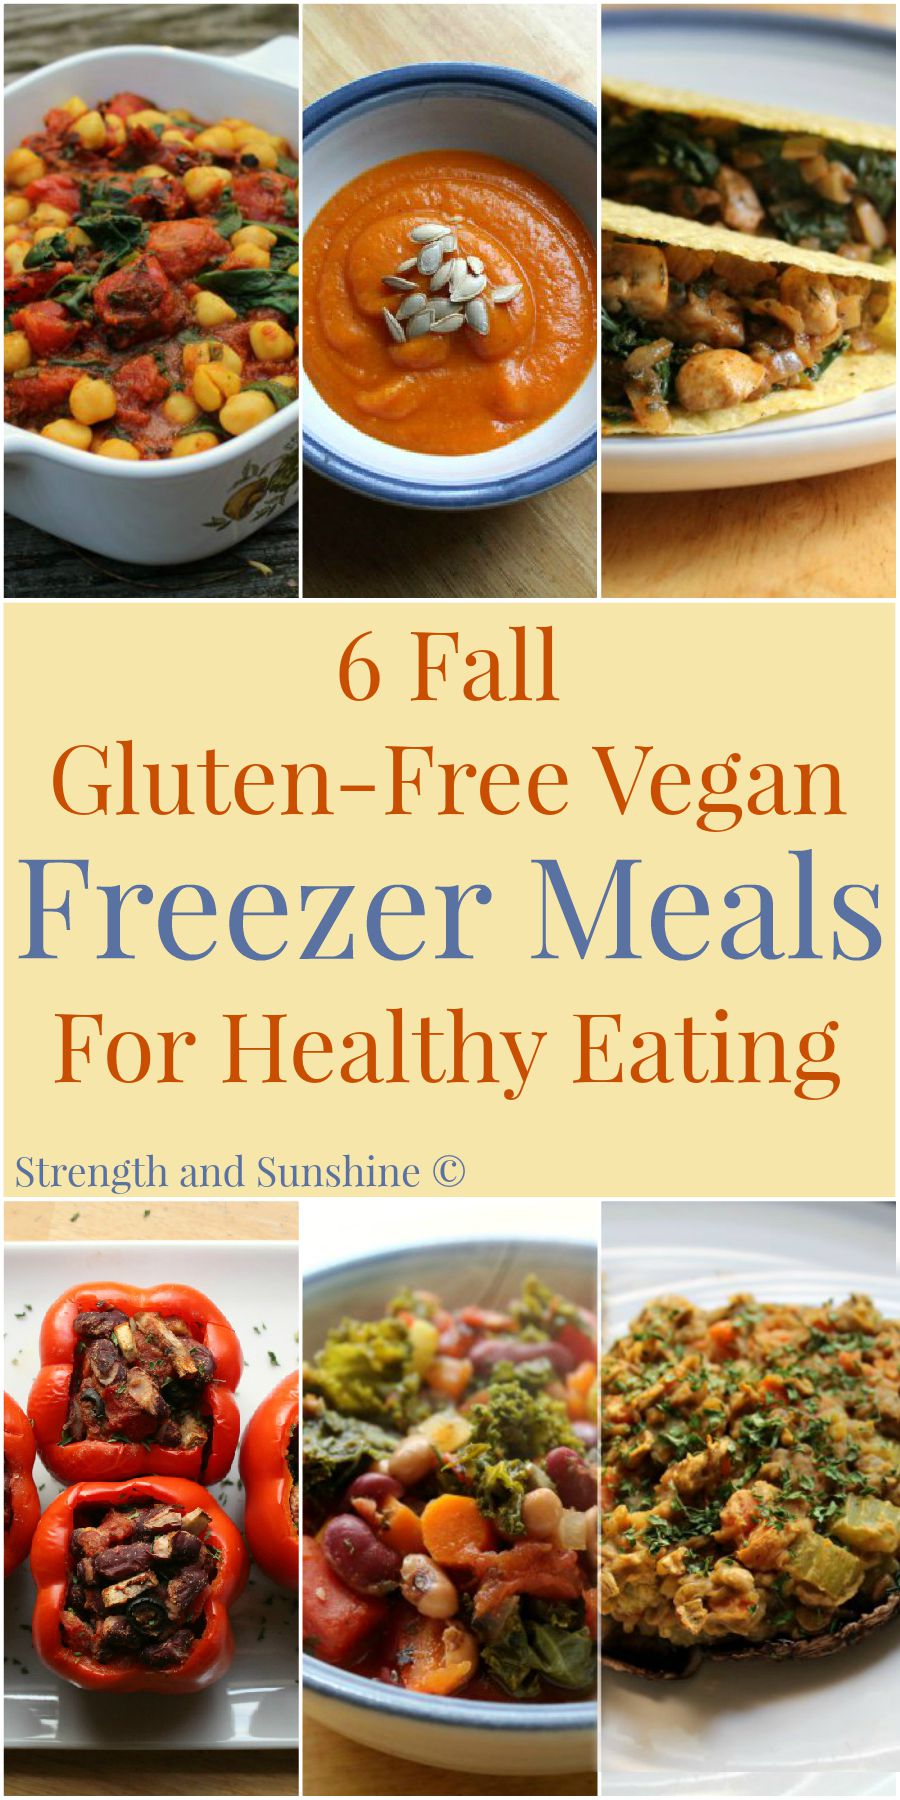 6 Fall Gluten-Free Vegan Freezer Meals For Healthy Eating | Strength and Sunshine @RebeccaGF666 In a season of busy, having healthy meals on hand to feed and nourish your family should be a priority. With these 6 fall inspired gluten-free vegan freezer meals, healthy dinners can be served in a snap!